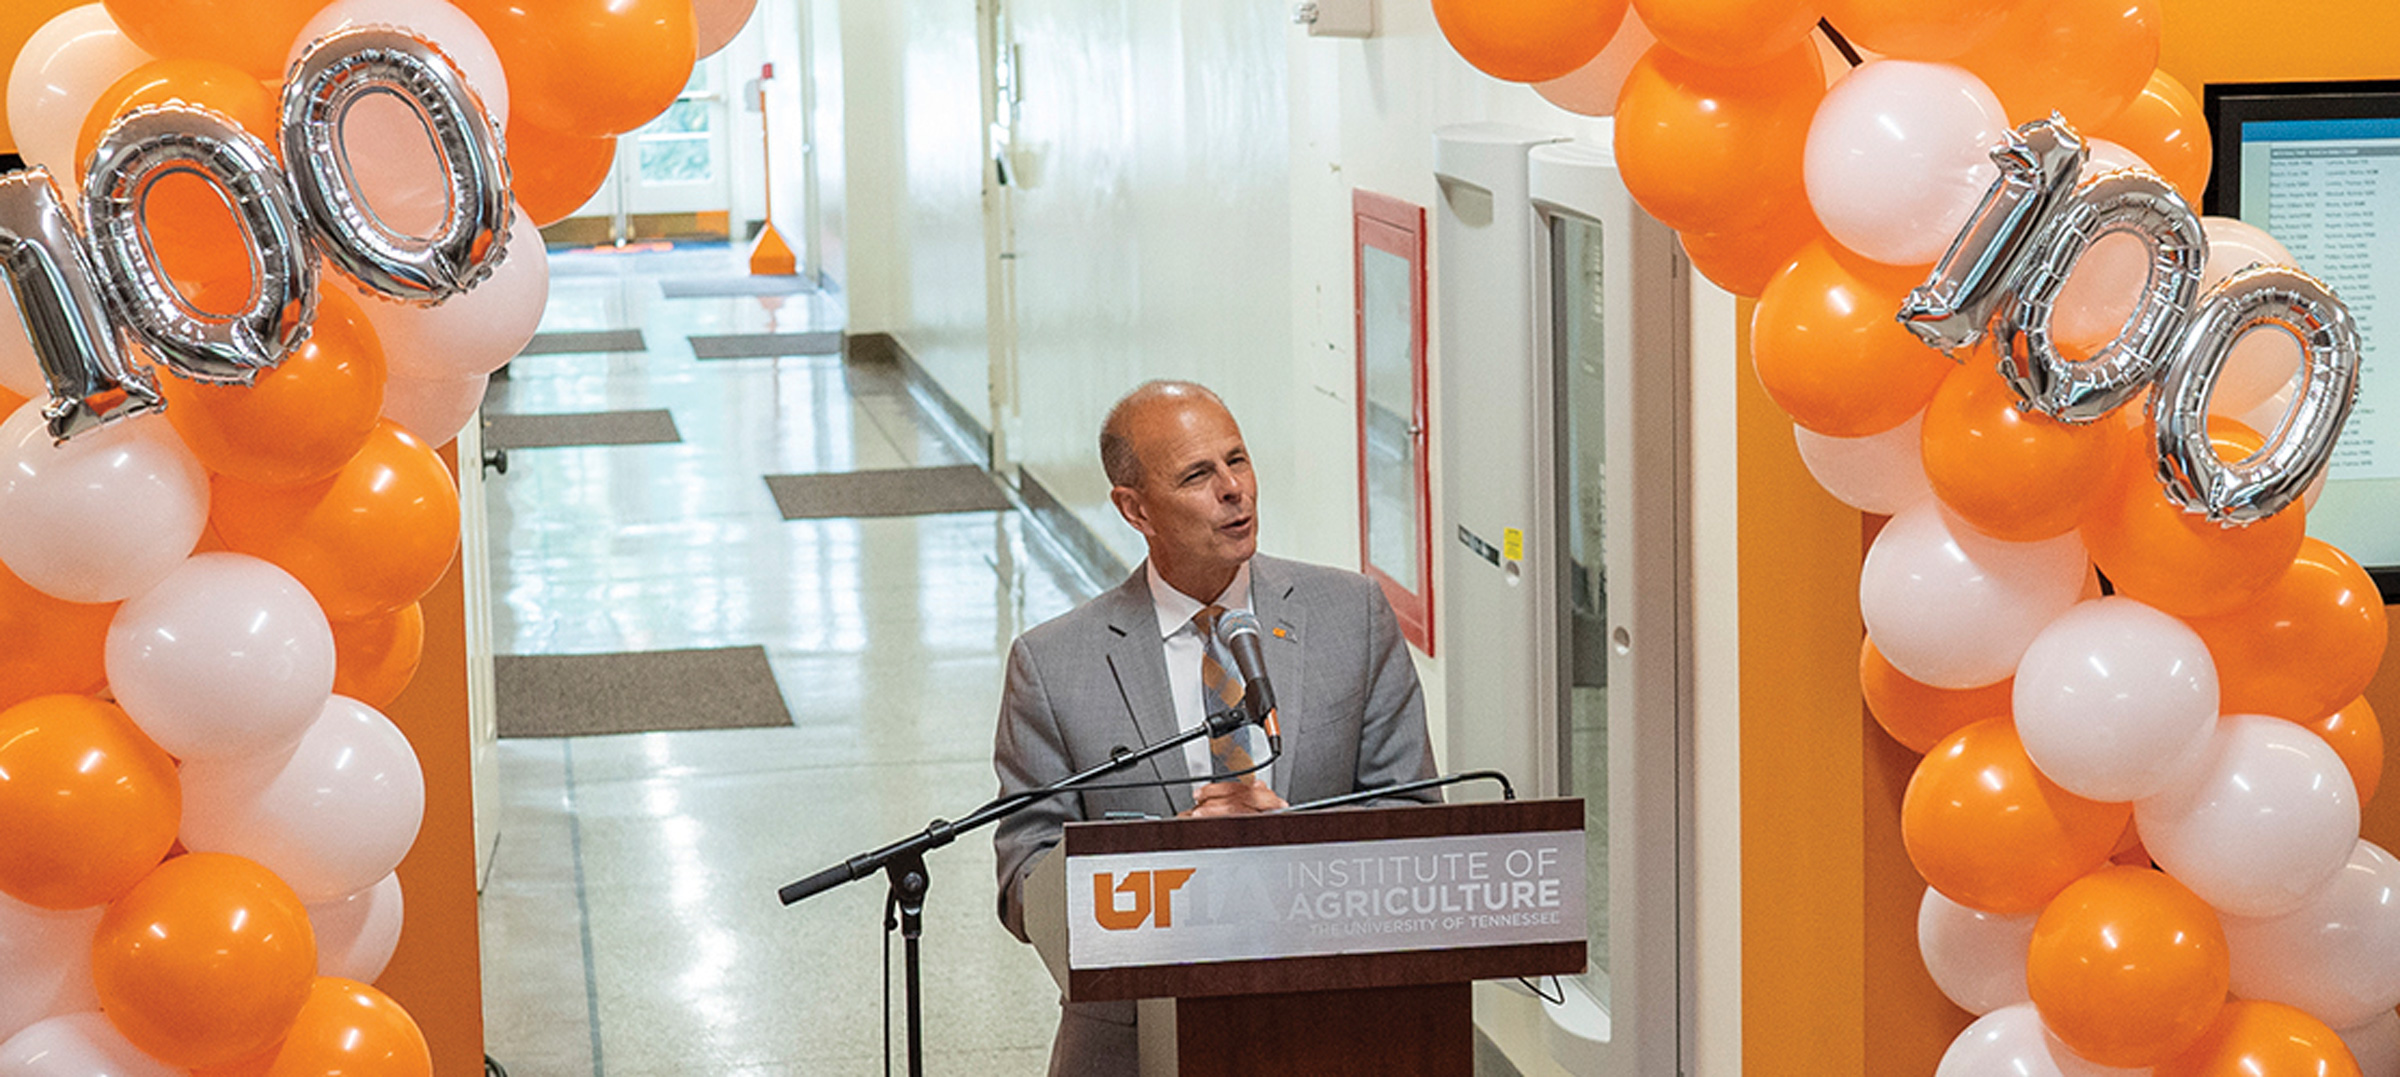 Tim Cross speaks at a podium surrounded by orange and white balloons